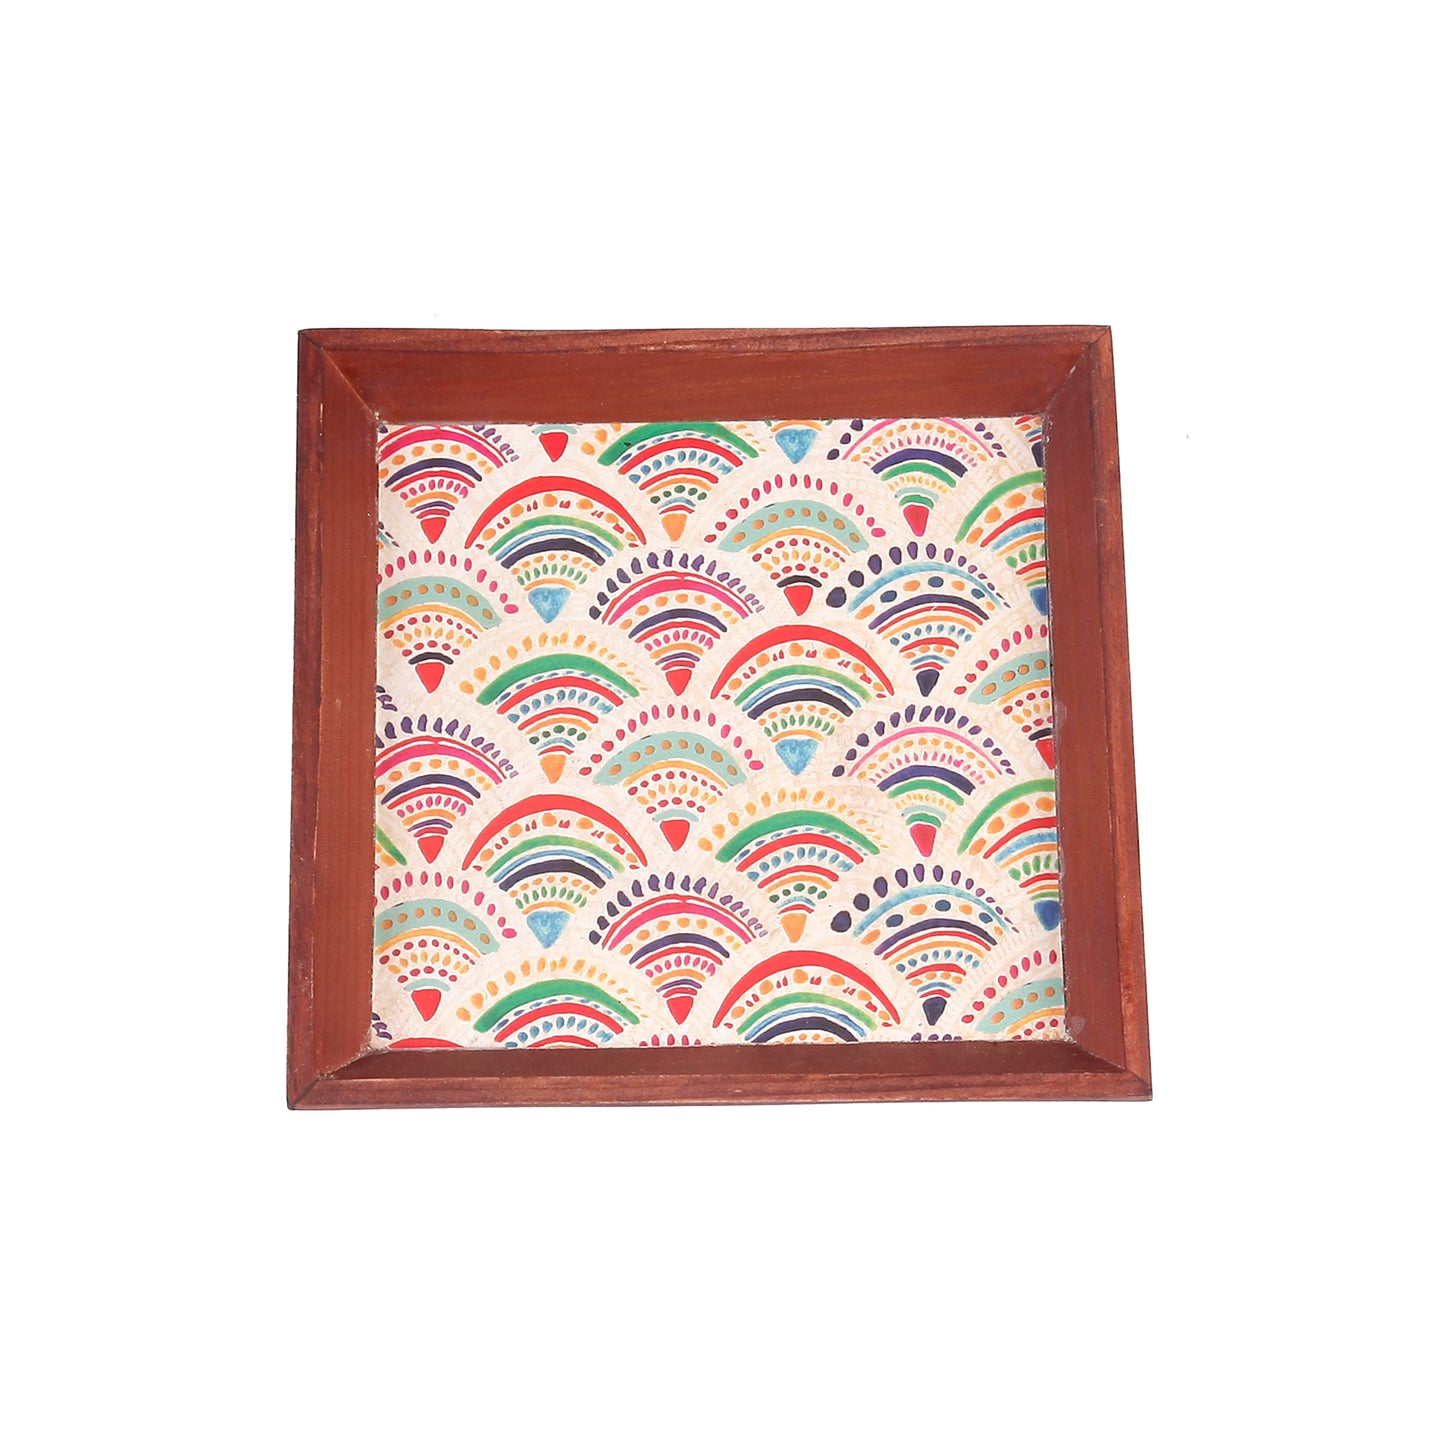 A Tiny Mistake Pankha Small Square Wooden Serving Tray, 18 x 18 x 2 cm